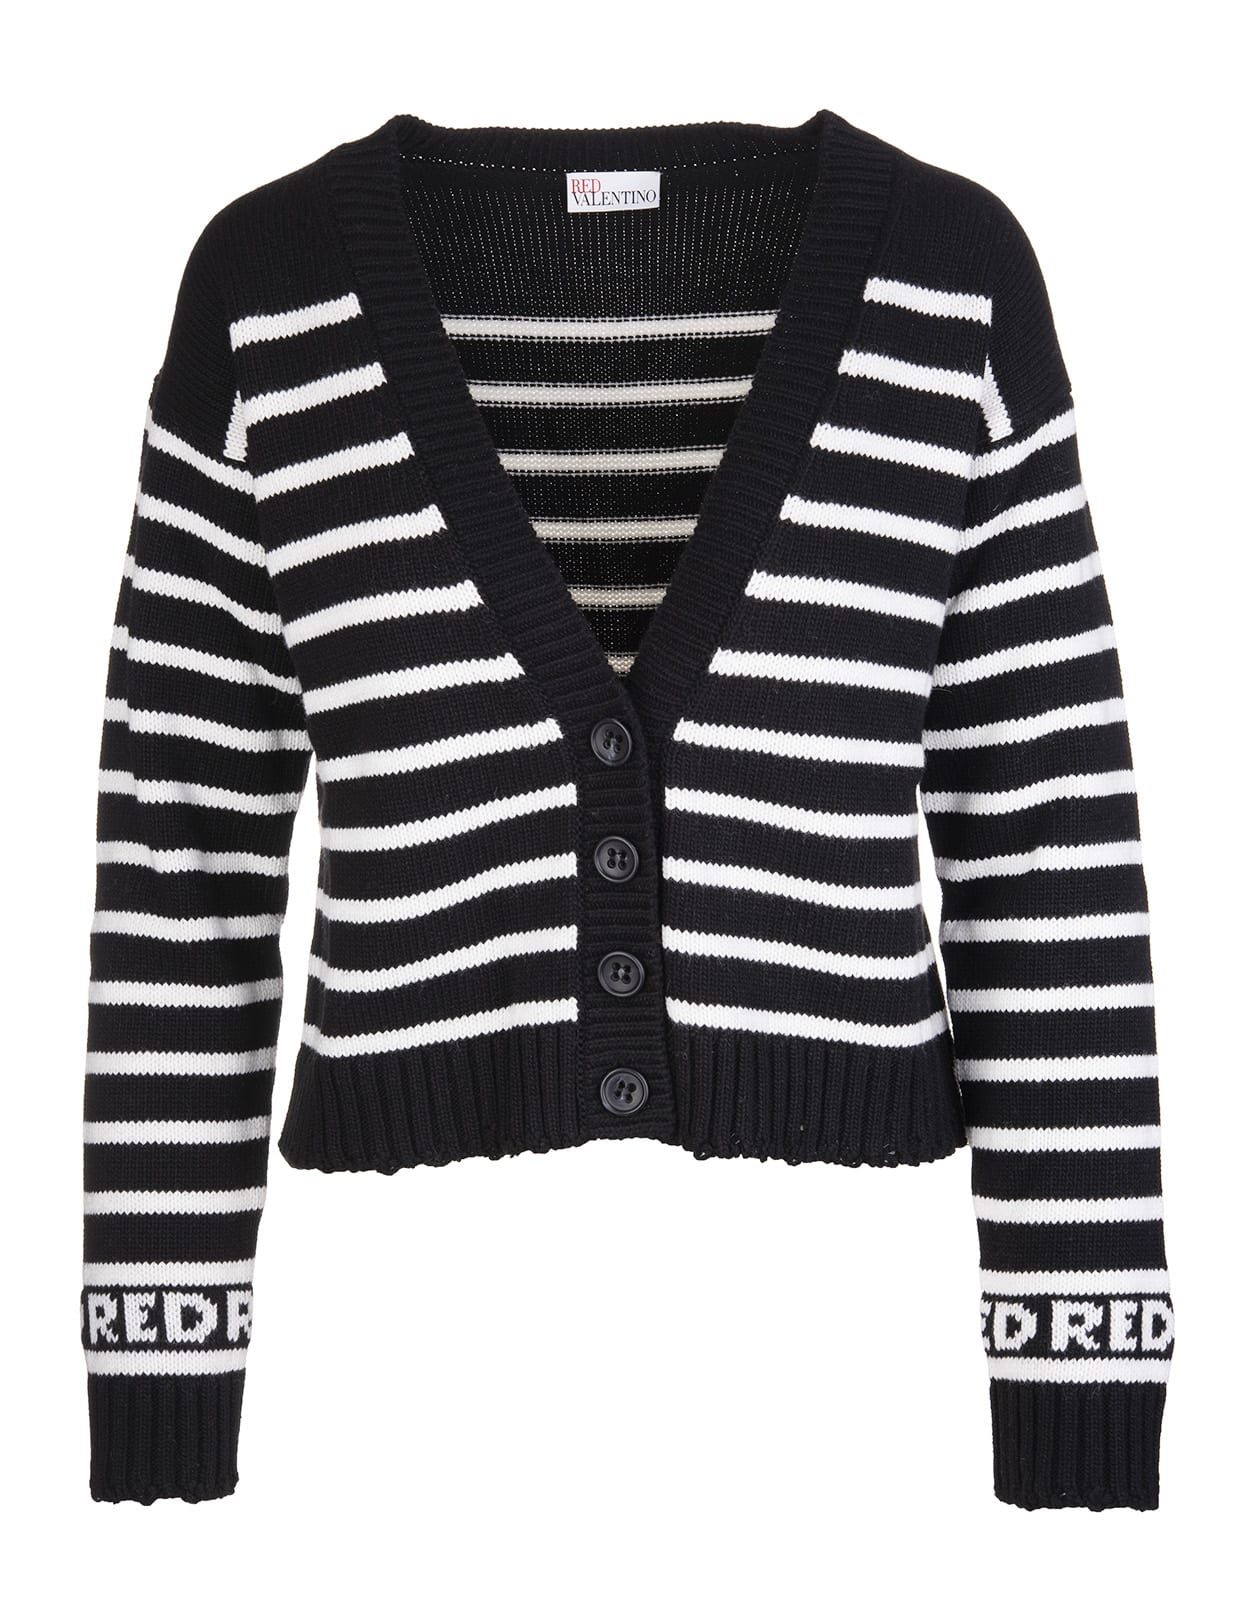 RED Valentino Black Cardigan In Wool Blend With White Stripes